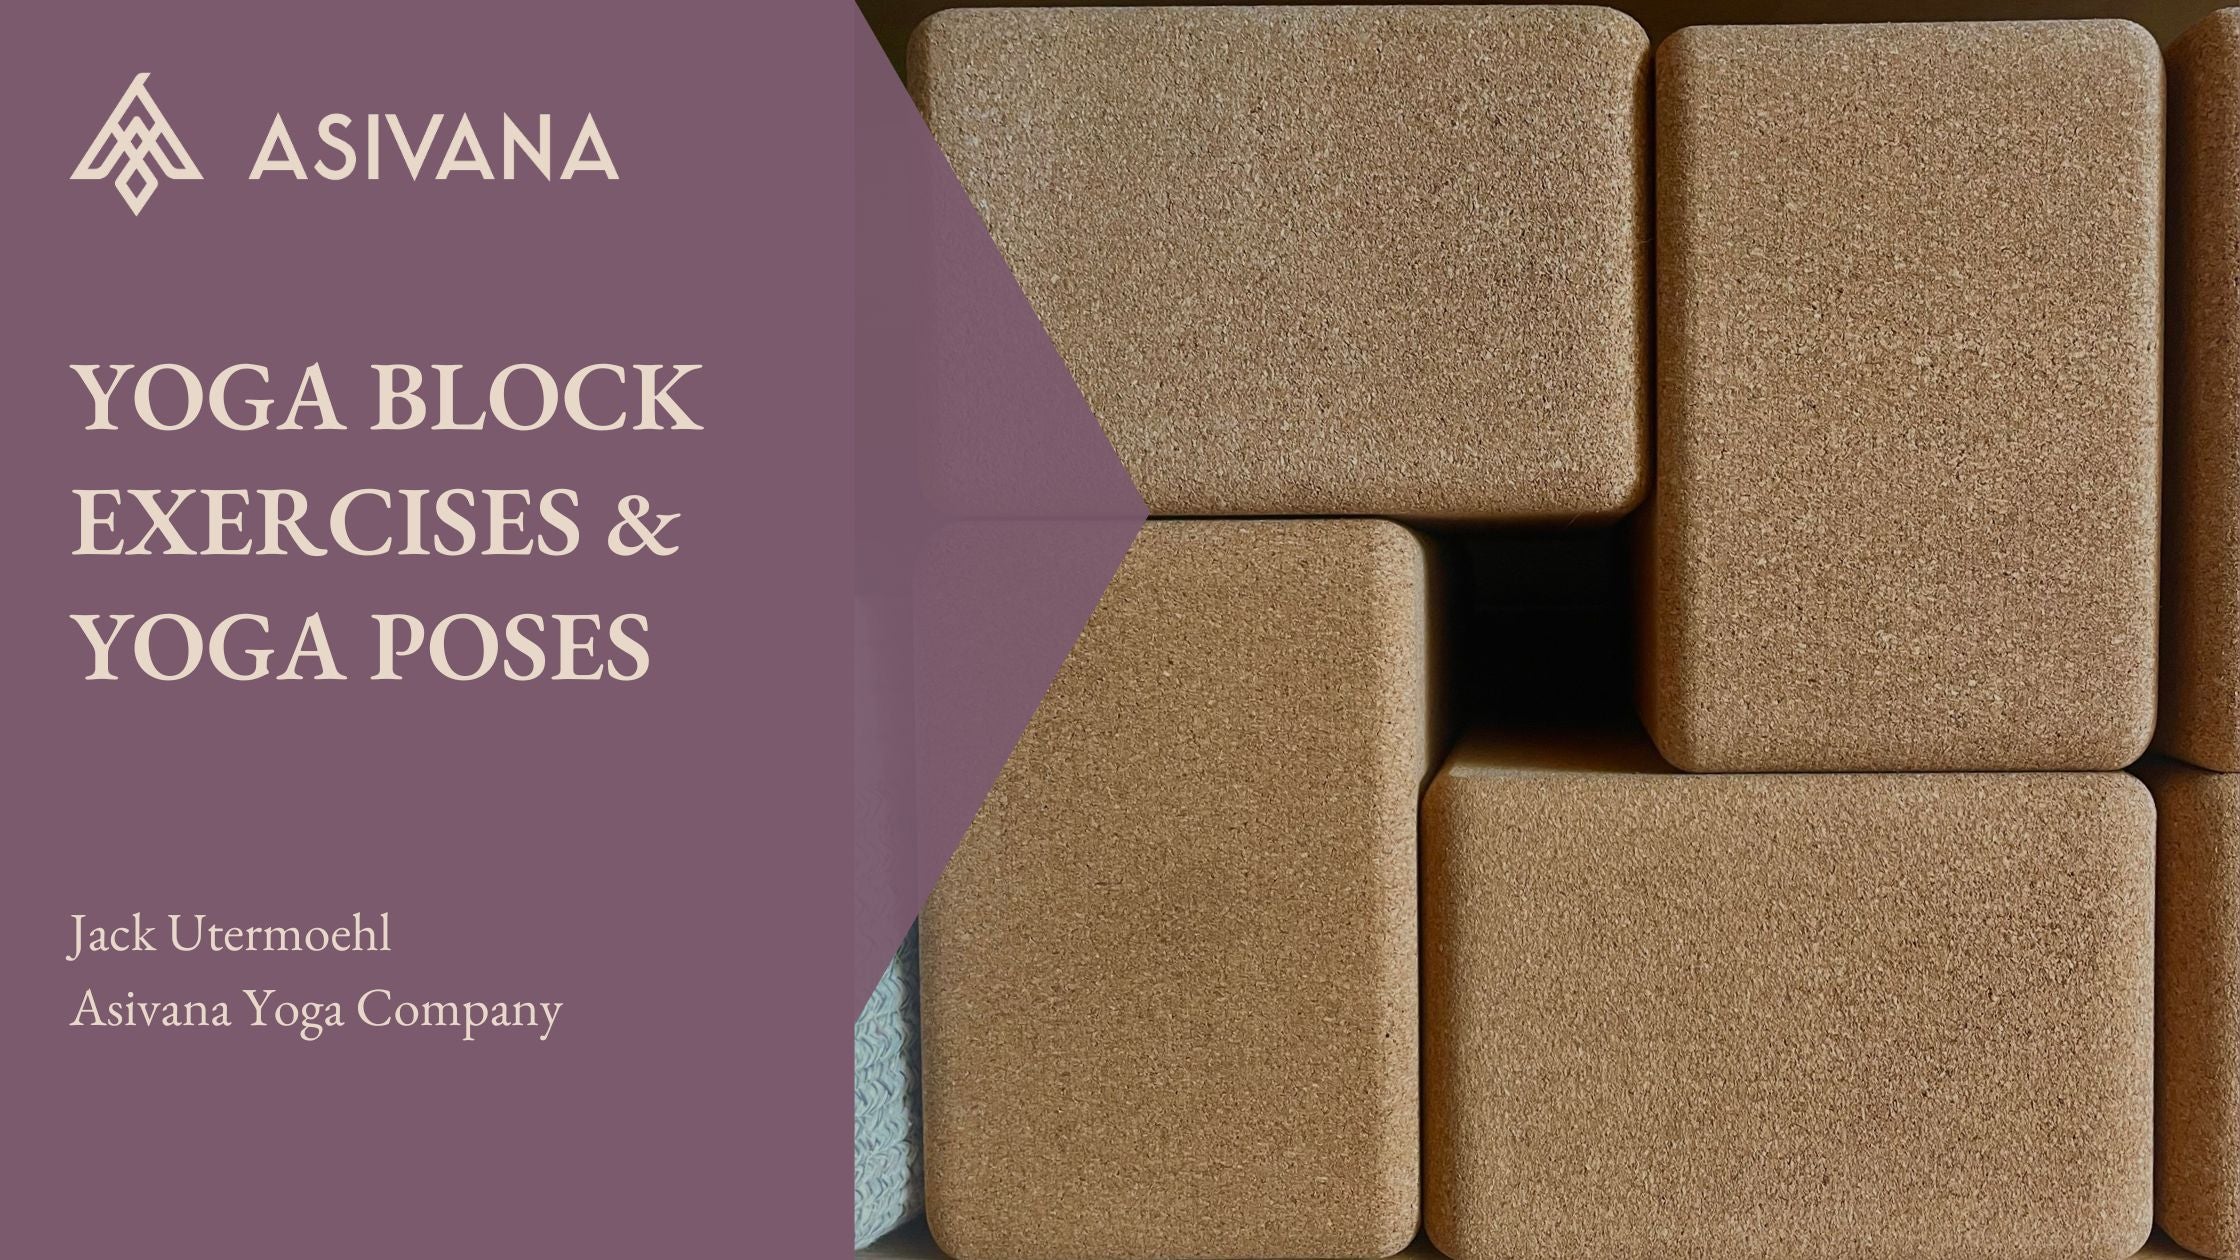 New to yoga? Here's why you should start practising with a yoga block brick  | HealthShots